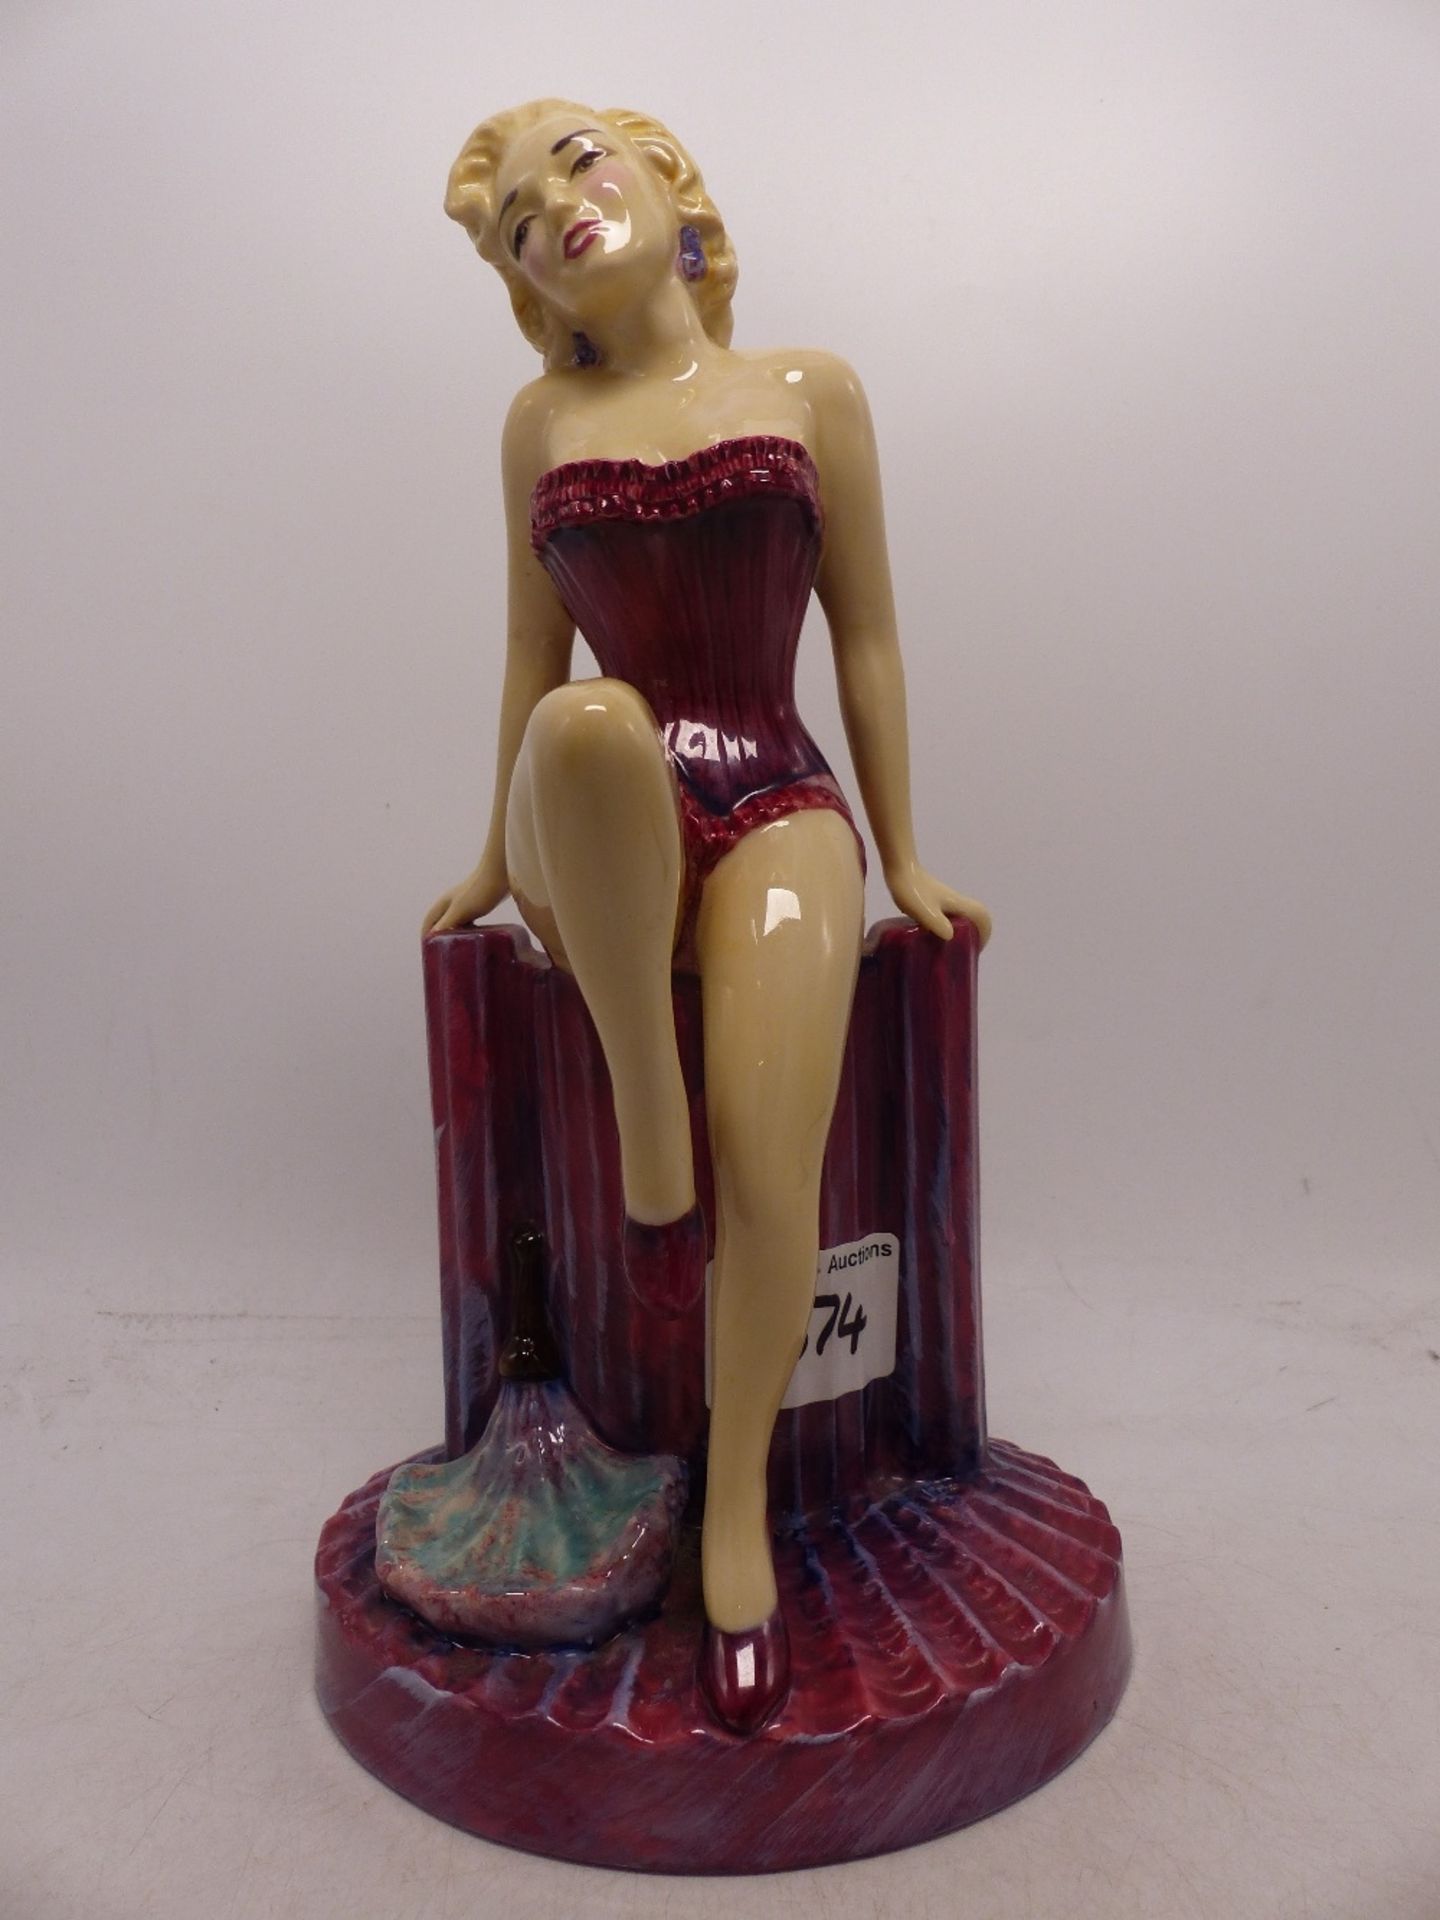 Kevin Francis Figure of Marilyn Monroe Limited Edition (seconds)